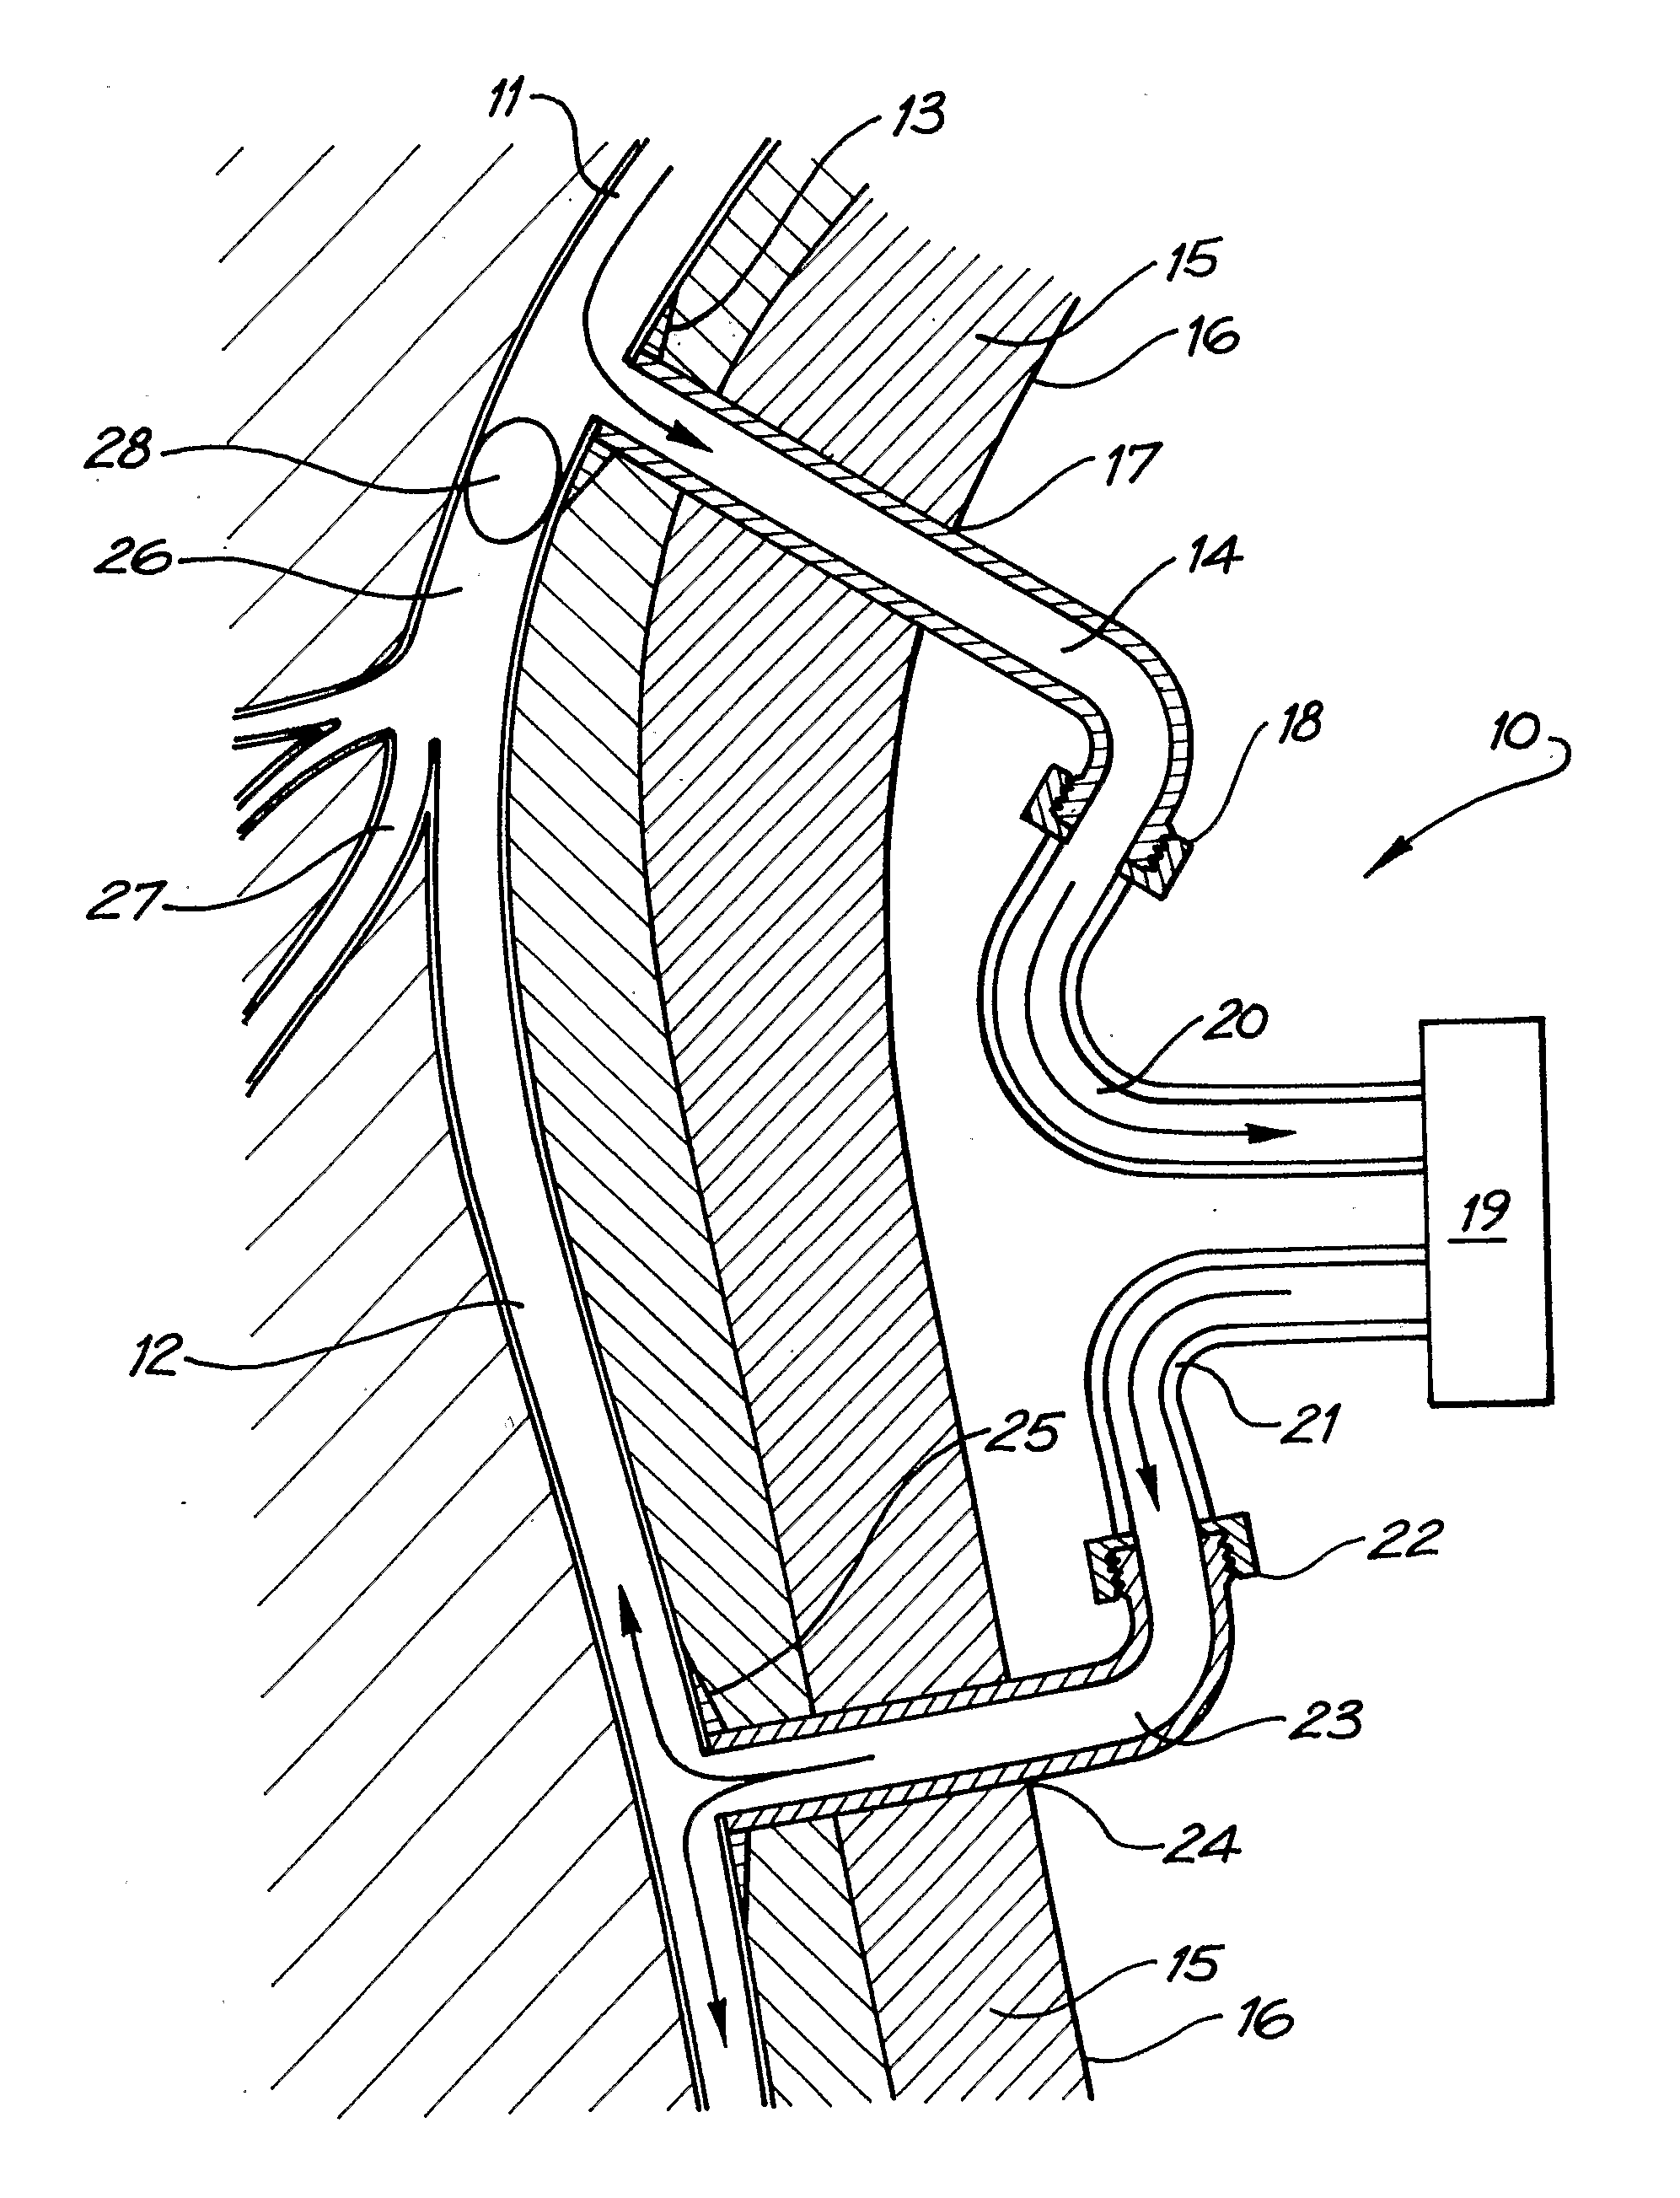 Peripheral Access Devices and Systems